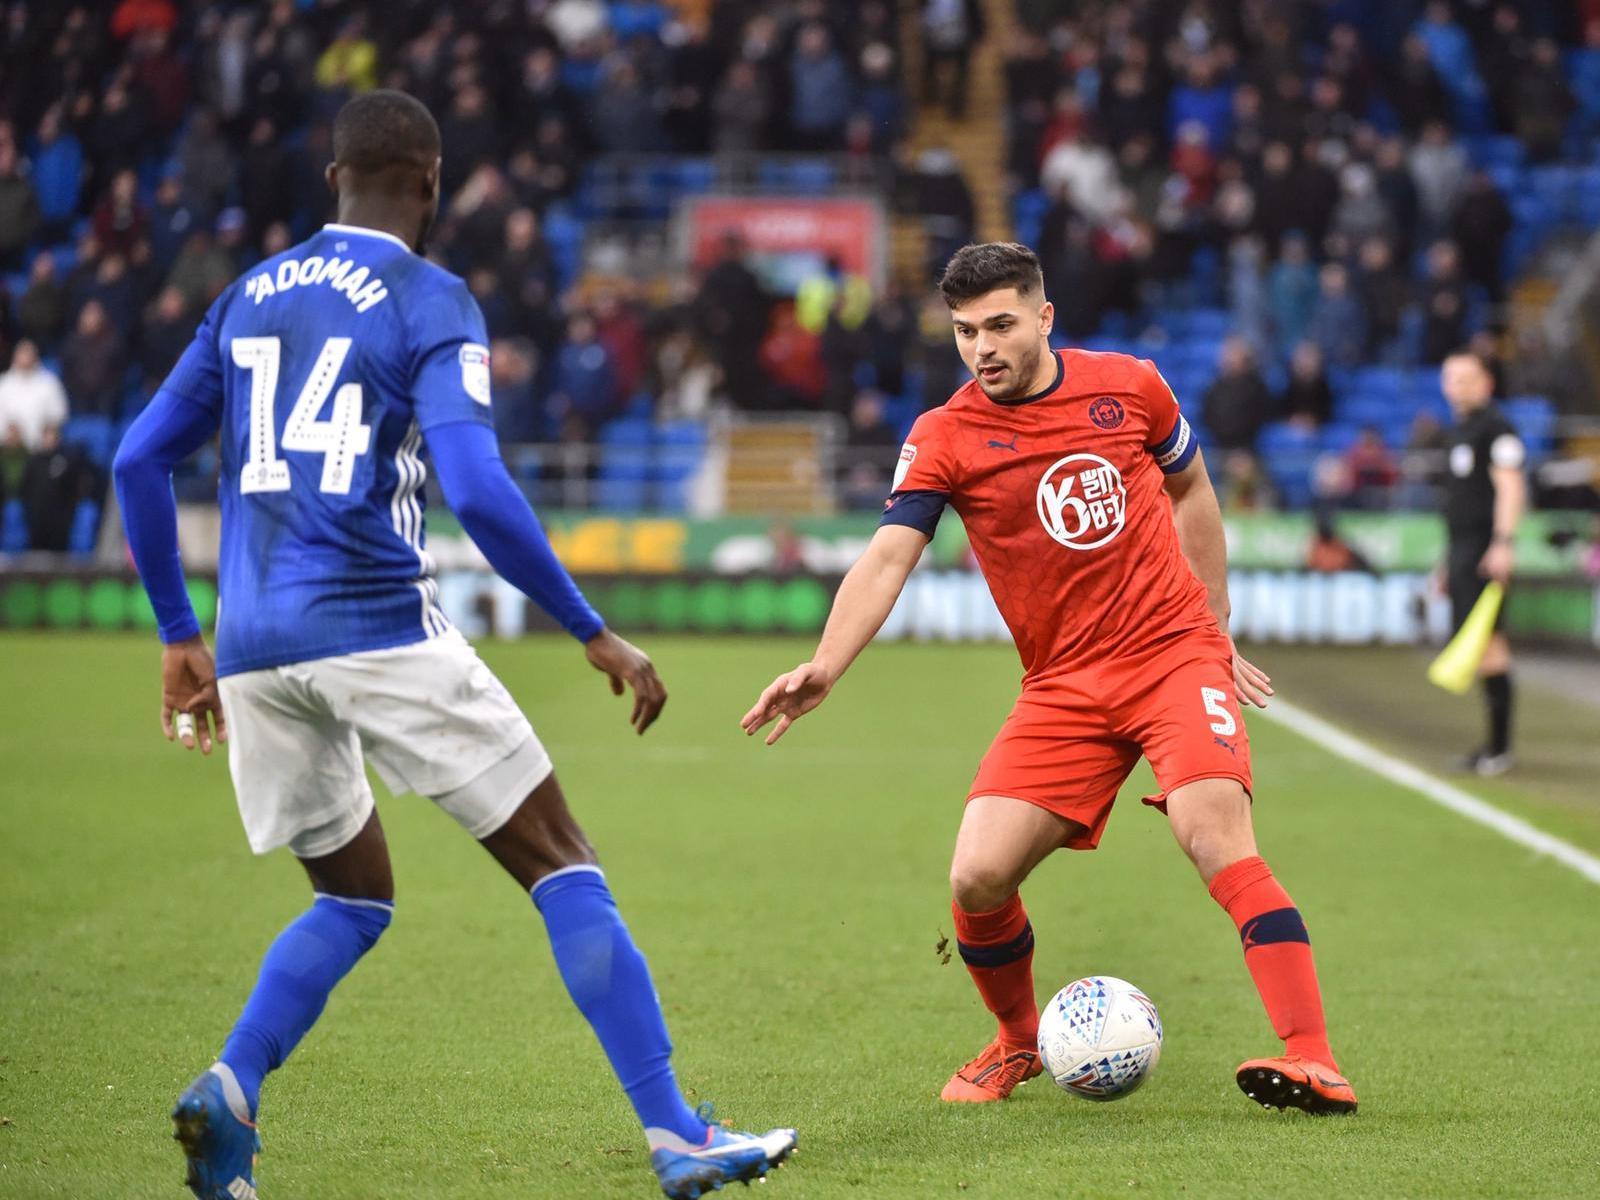 Sam Morsy: 8 - Again bossed the midfield, and continued his creative streak with the cross for Moore's firstgoal